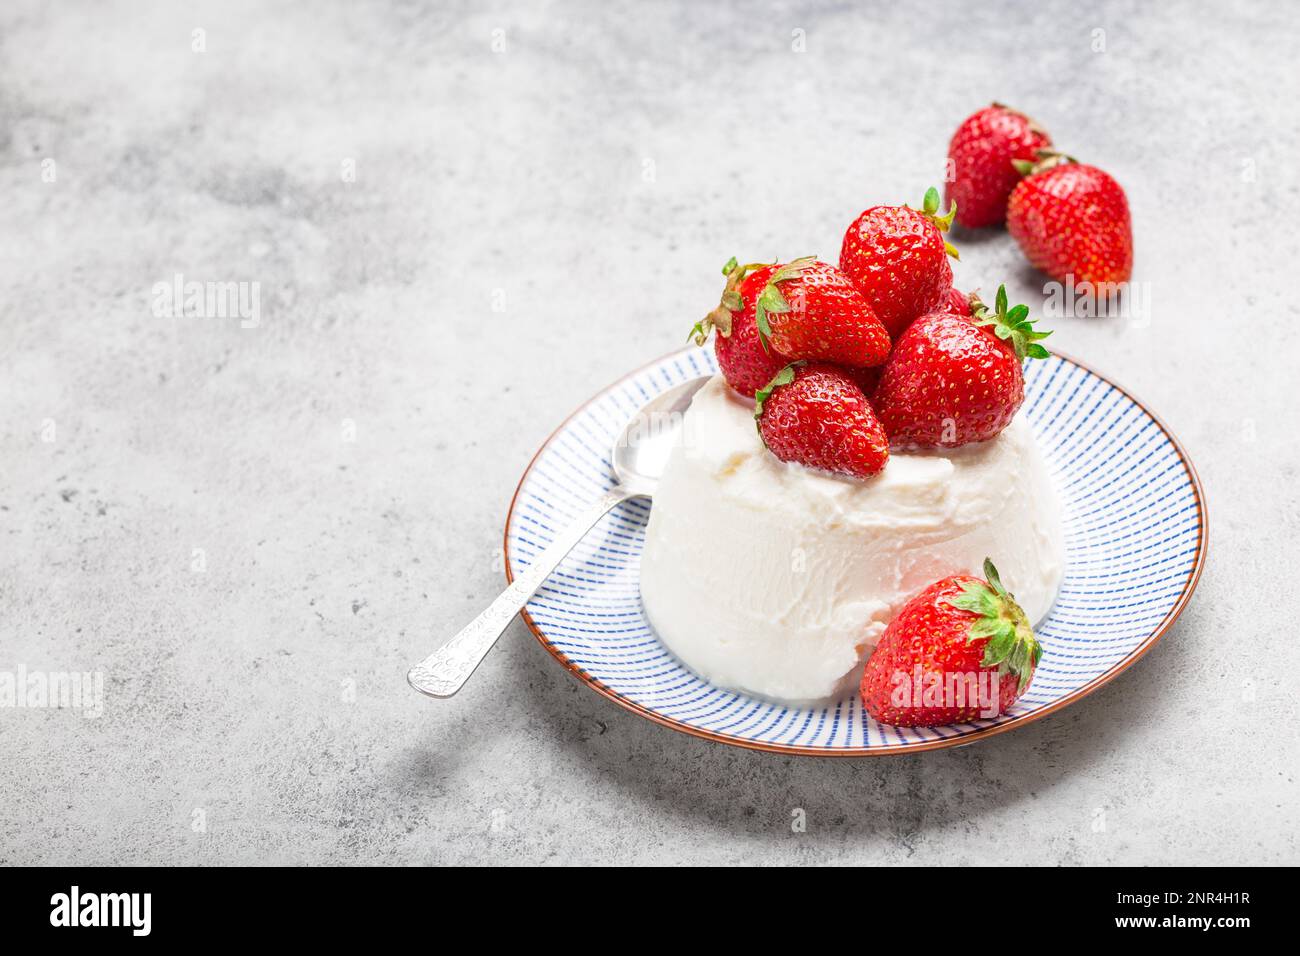 Close-up of fresh Italian cheese ricotta with strawberries on a plate with a spoon, grey rustic stone background, light summer dessert or snack, good Stock Photo